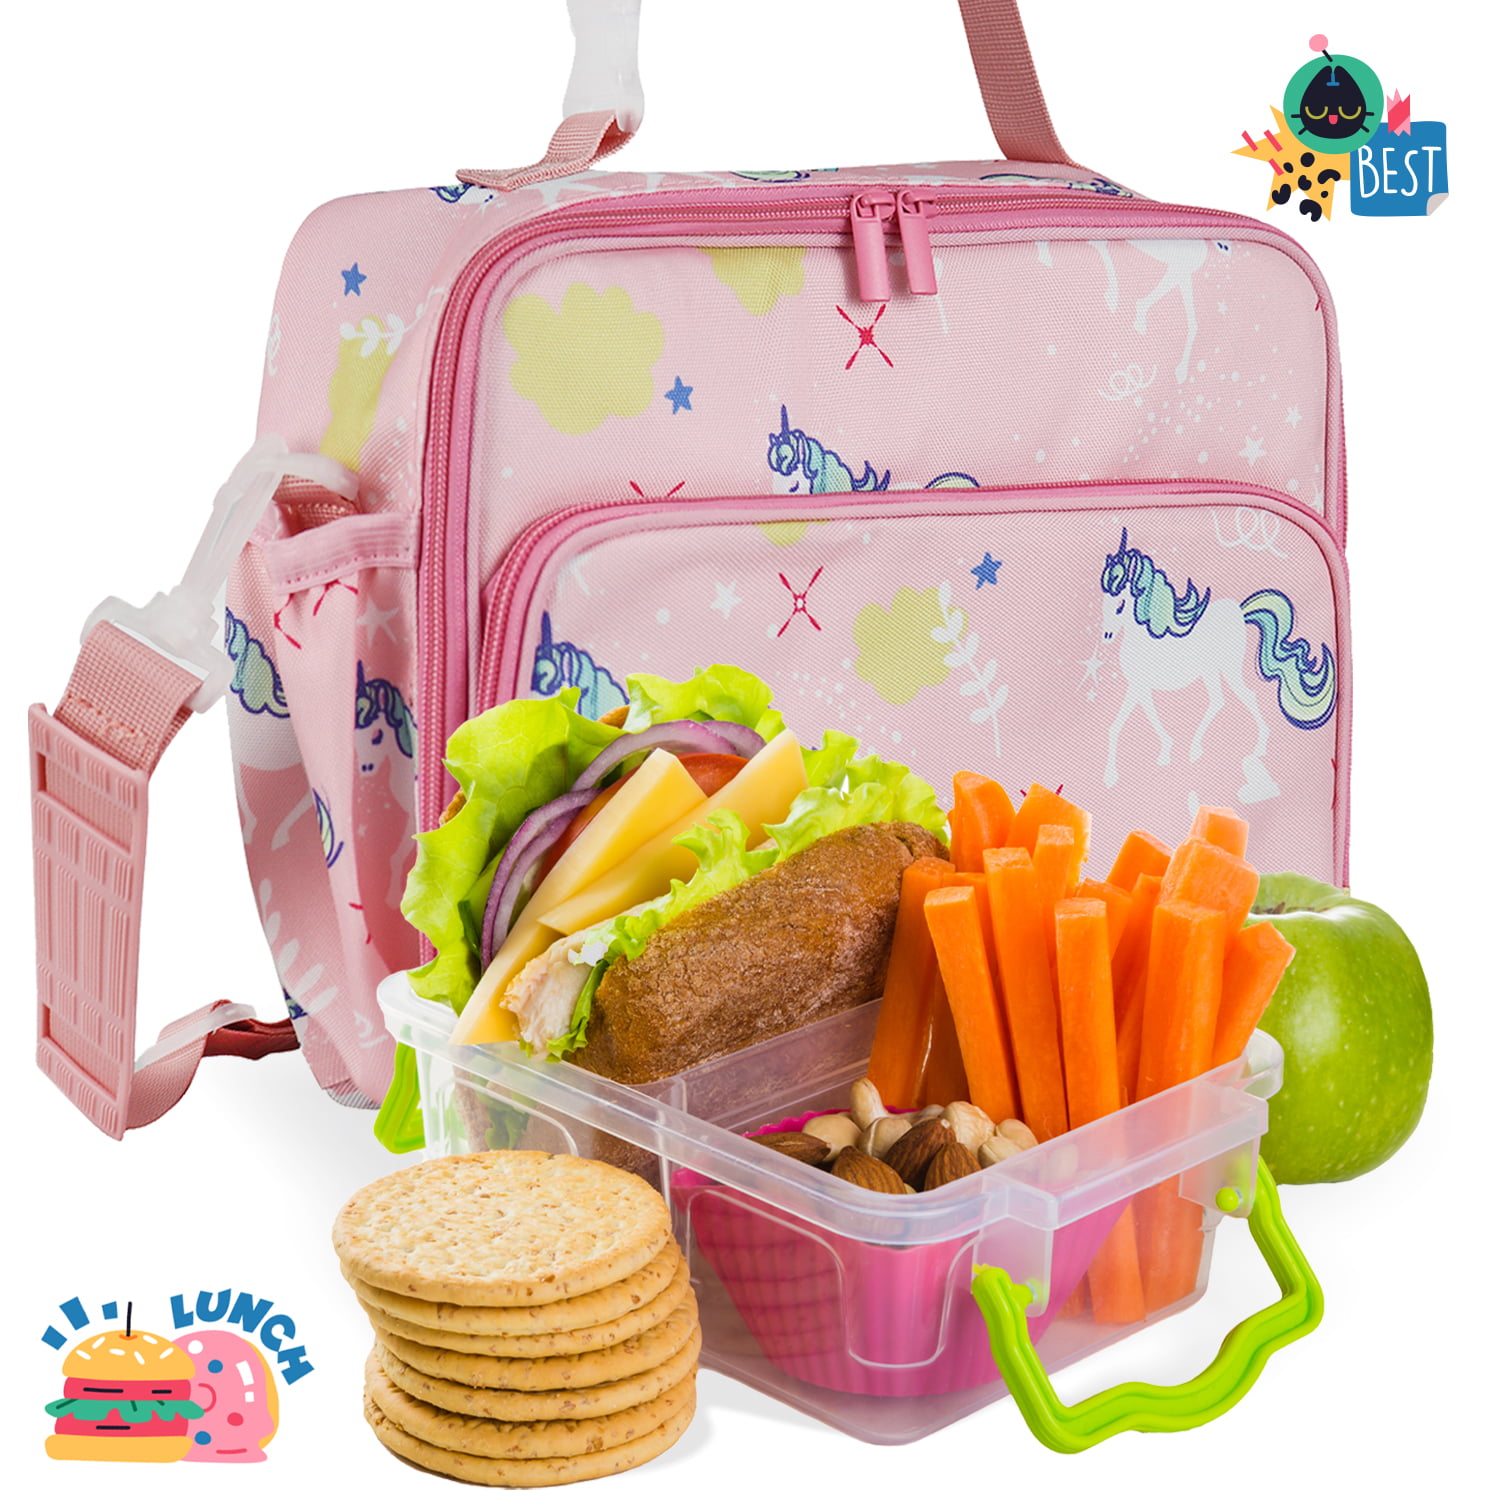 Best Lunch Boxes for Kids - Pretty Little Apron  Best kids lunch box, Cool lunch  boxes, Kids lunchbox